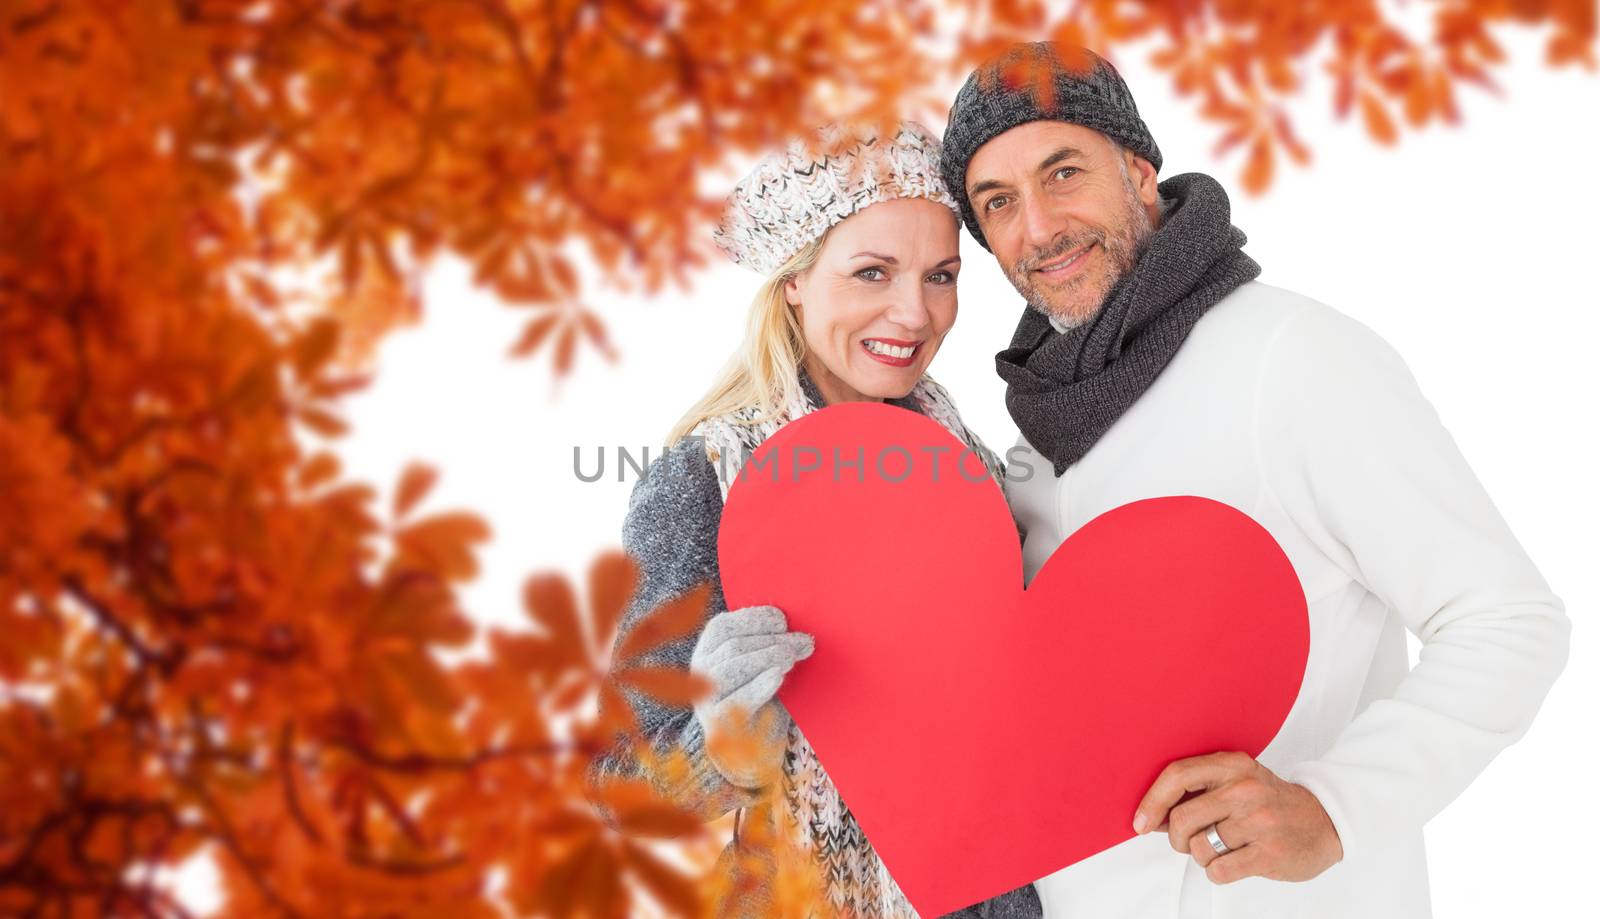 Portrait of happy couple holding heart against autumn leaves